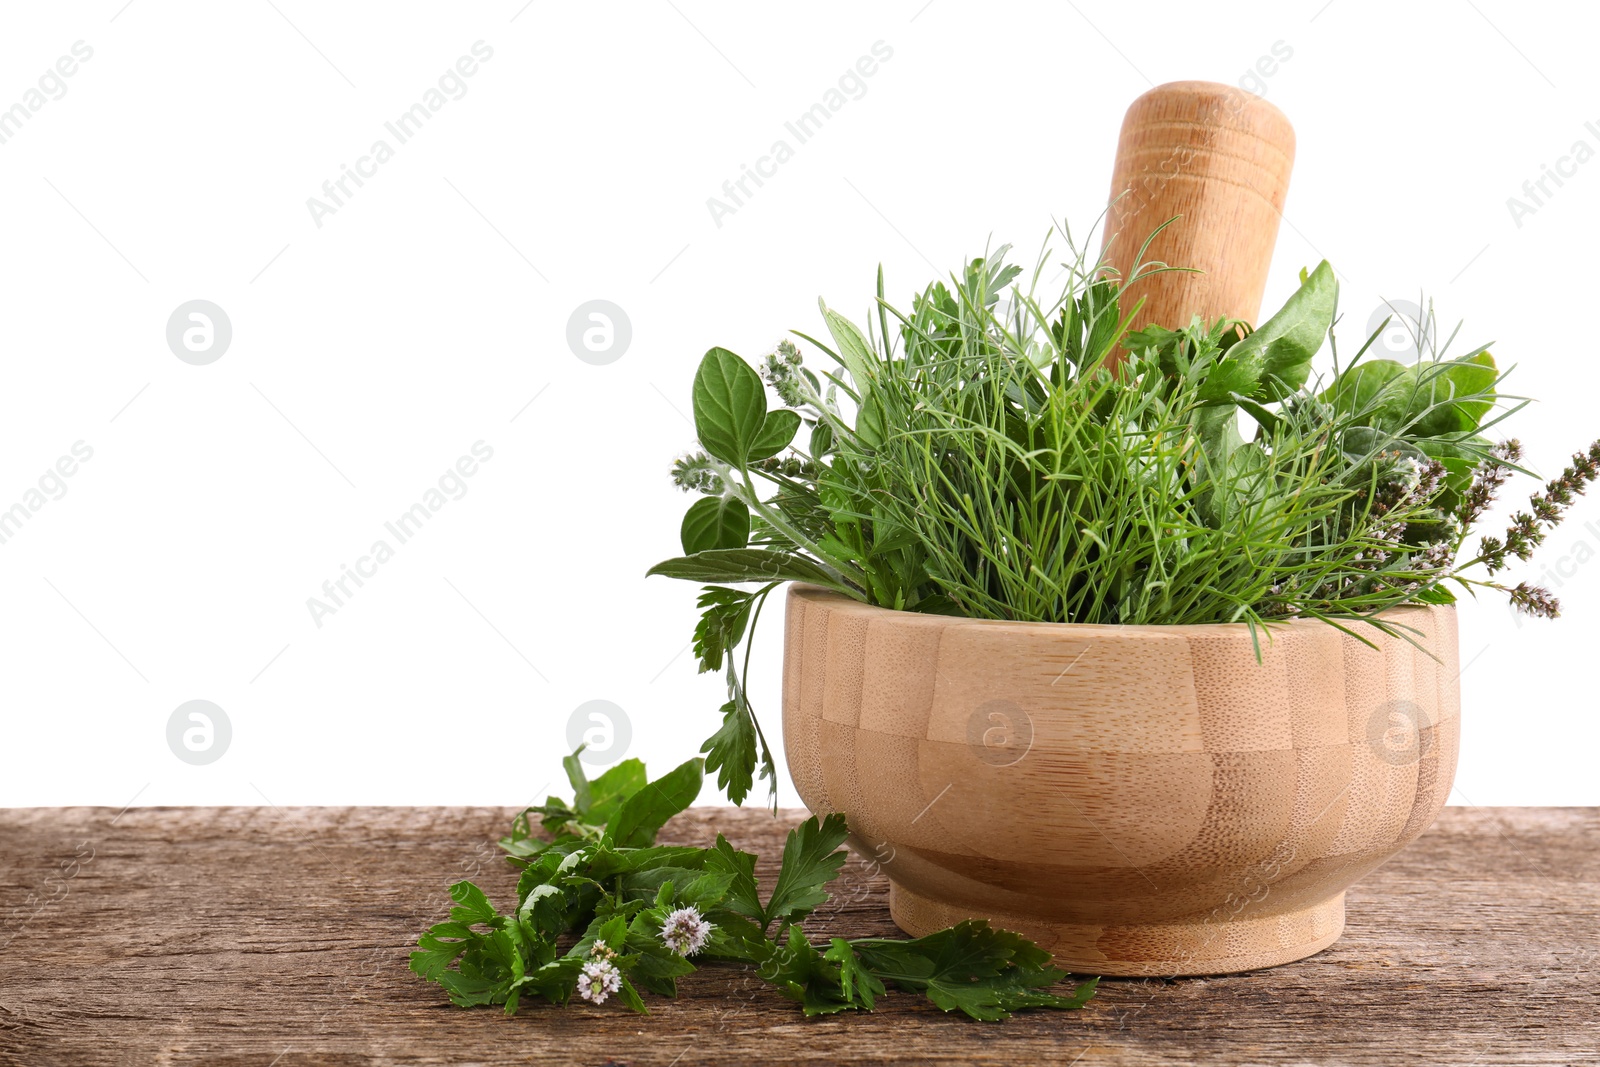 Photo of Mortar, pestle and different herbs on wooden table against white background. Space for text